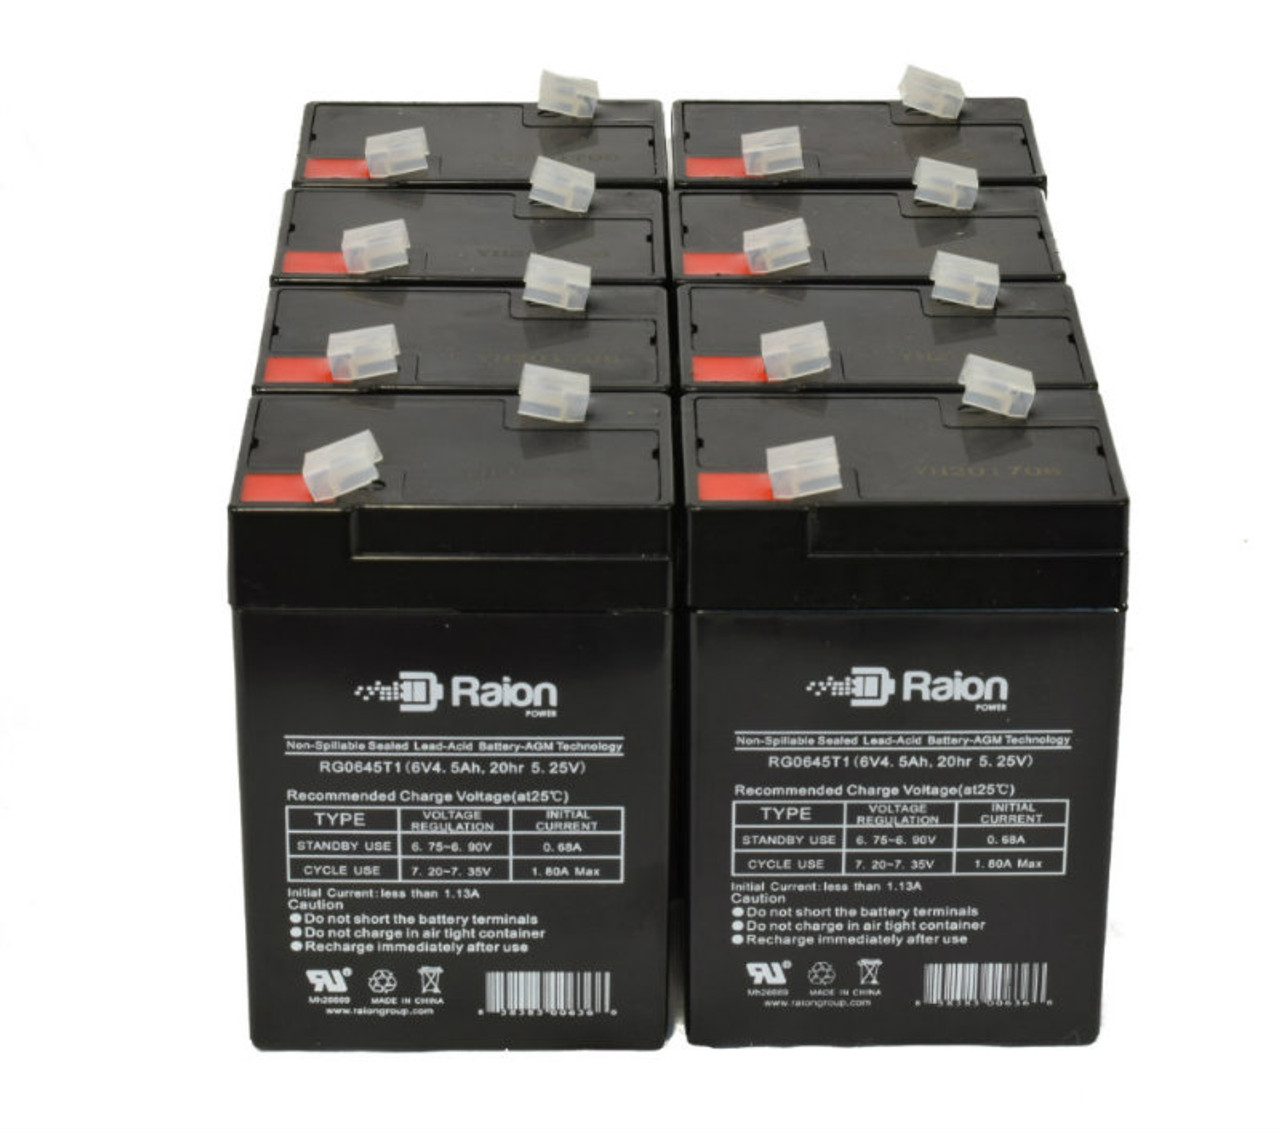 Raion Power 6V 4.5Ah Replacement Emergency Light Battery for Lithonia AQM - 8 Pack